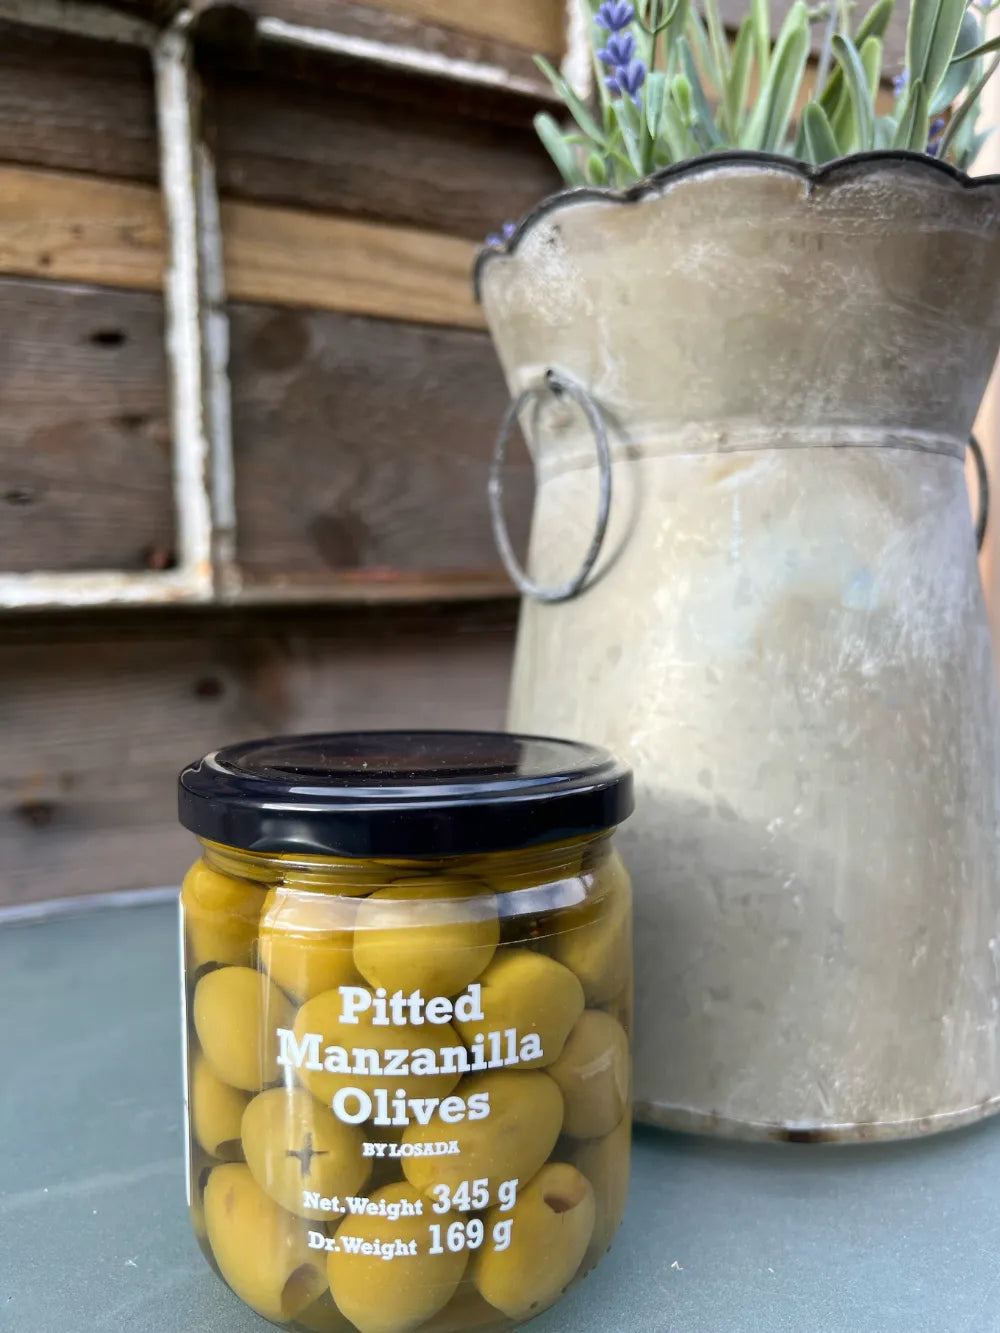 Spice by Spice, Pitted Manzanilla Olives